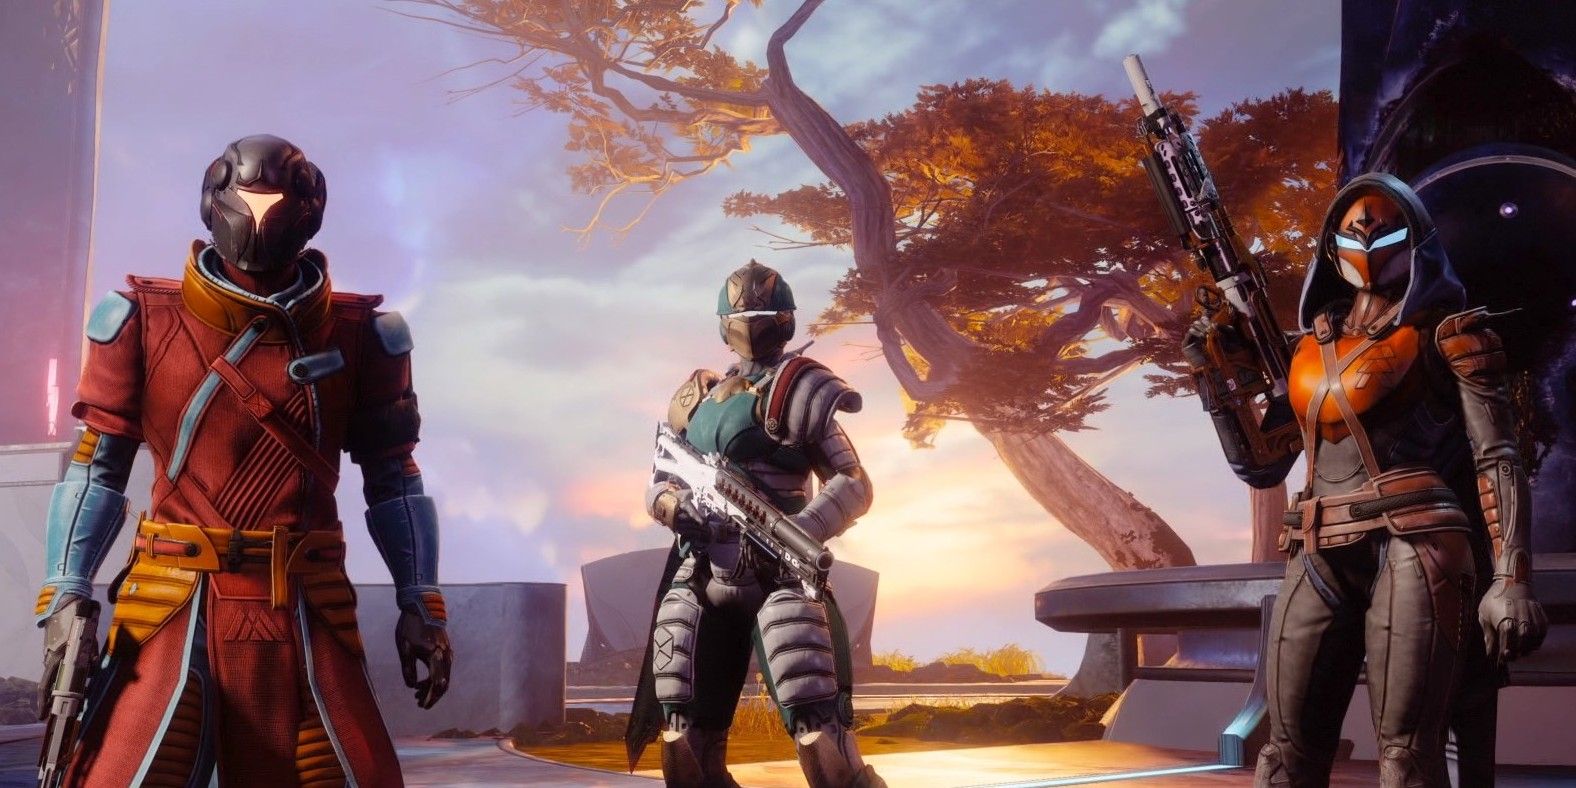 Three characters standing together in Destiny 2